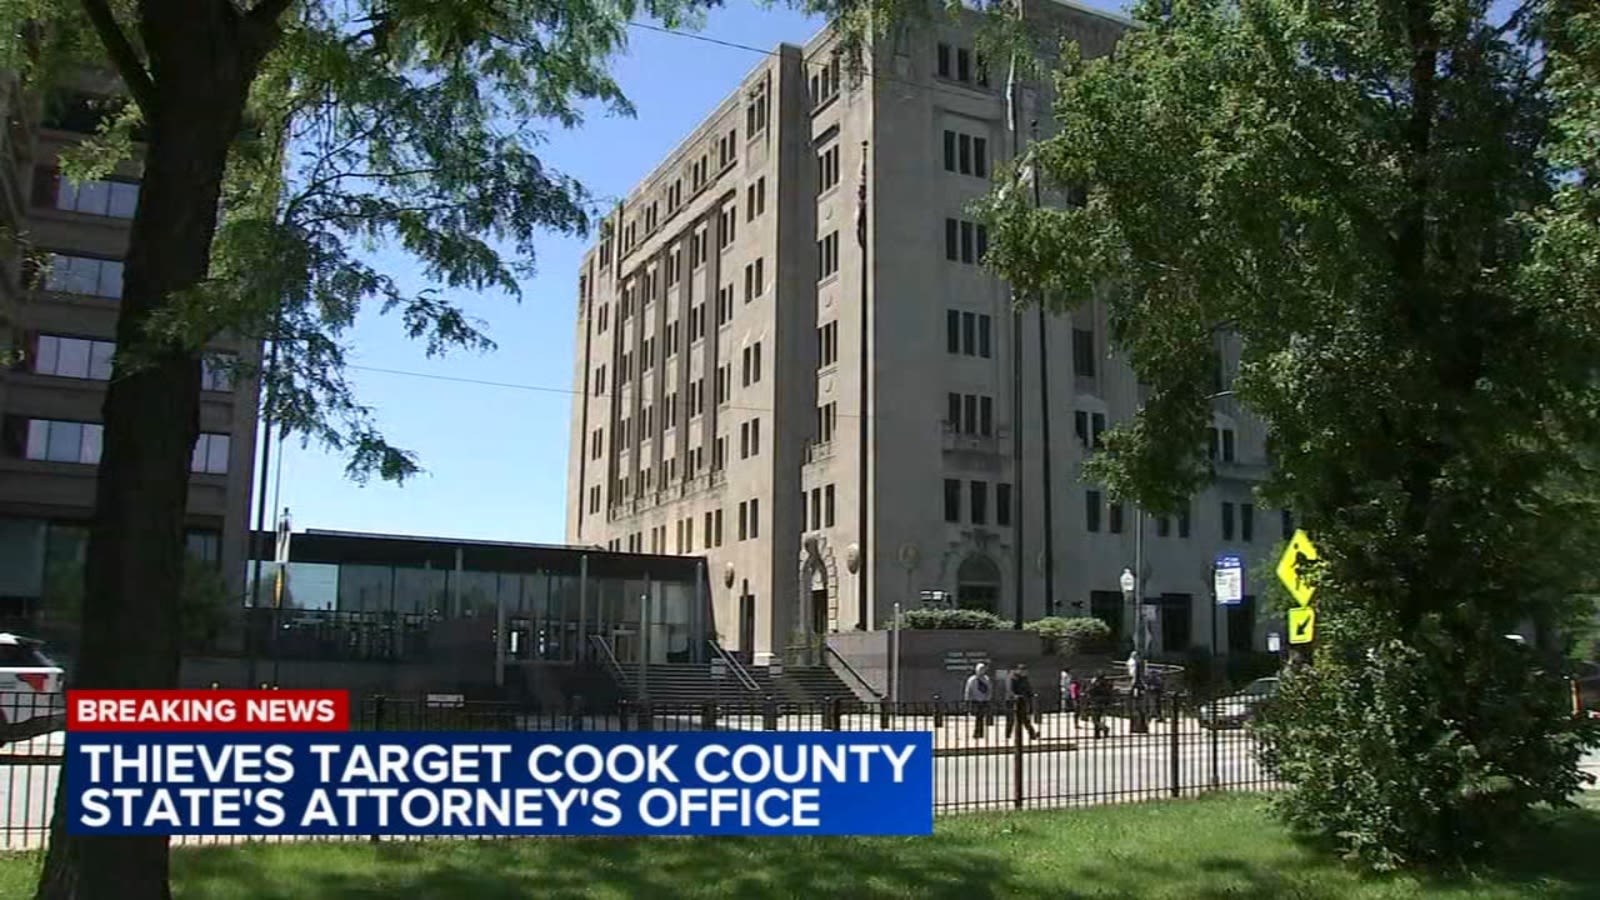 Thieves steal from Cook County State's Attorney's Office inside courthouse, authorities say